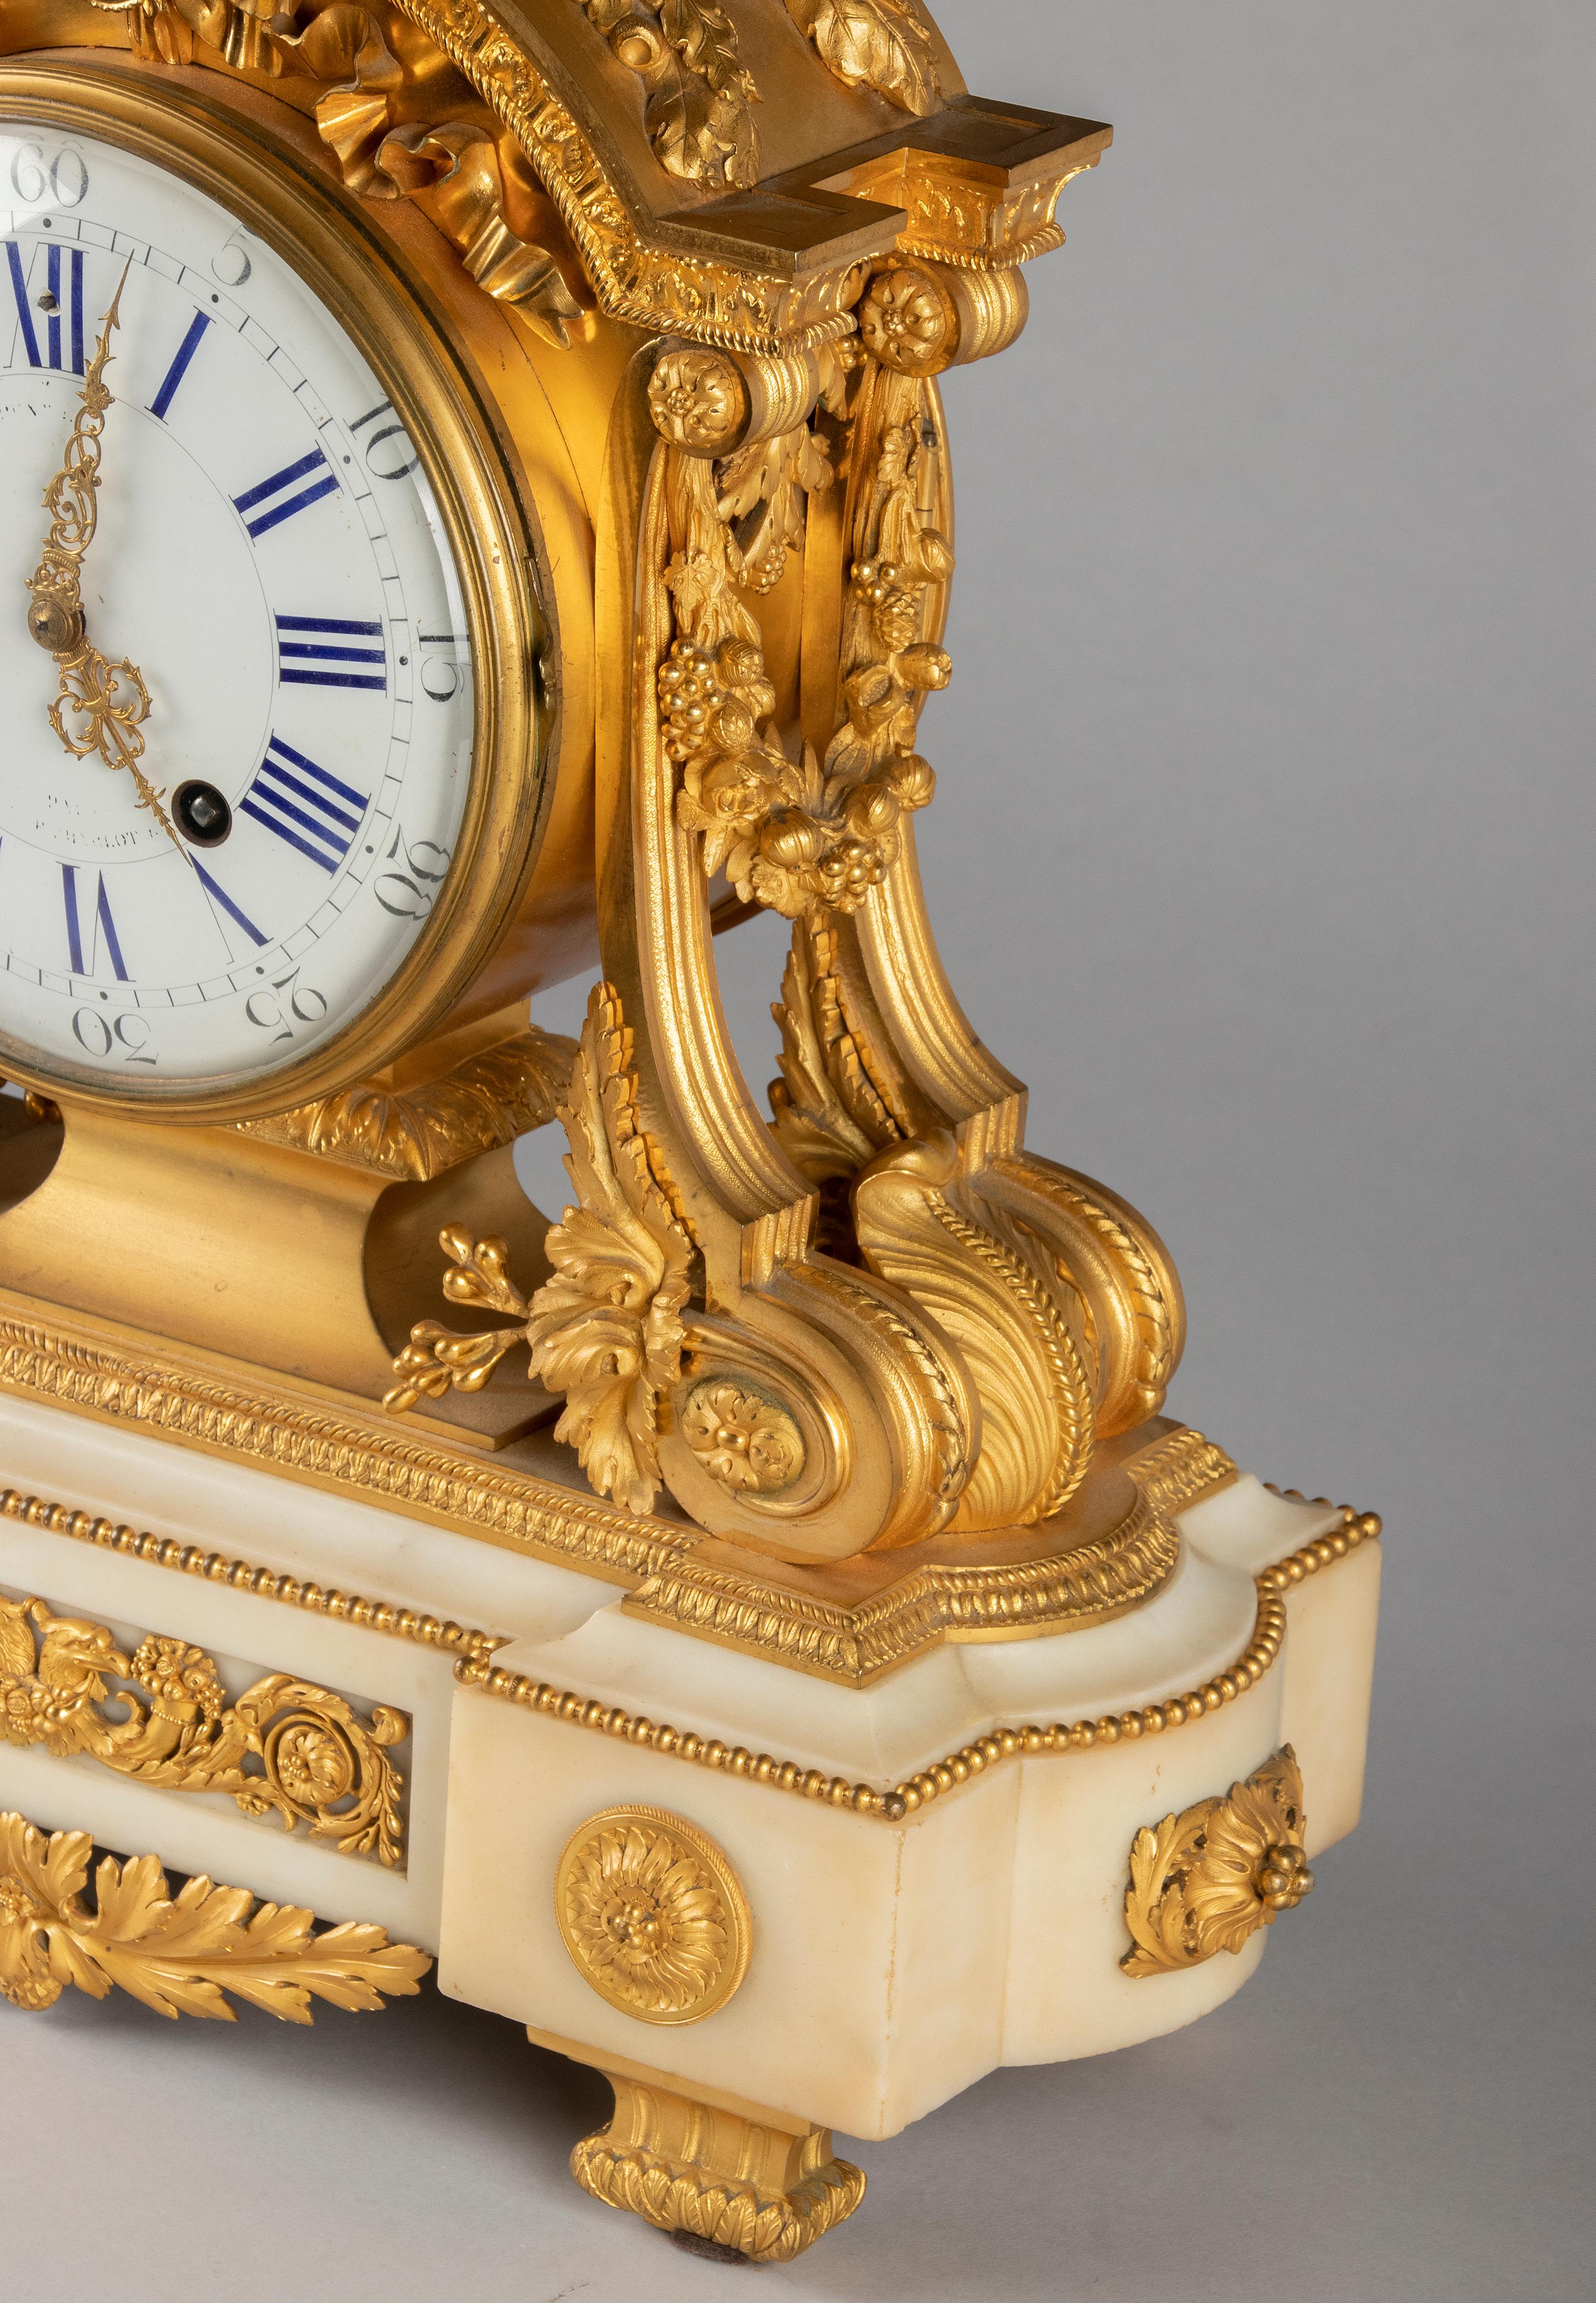 Late 19th Century Louis XVI Style Bronze Ormolu Mantel Clock by Charpentier For Sale 12